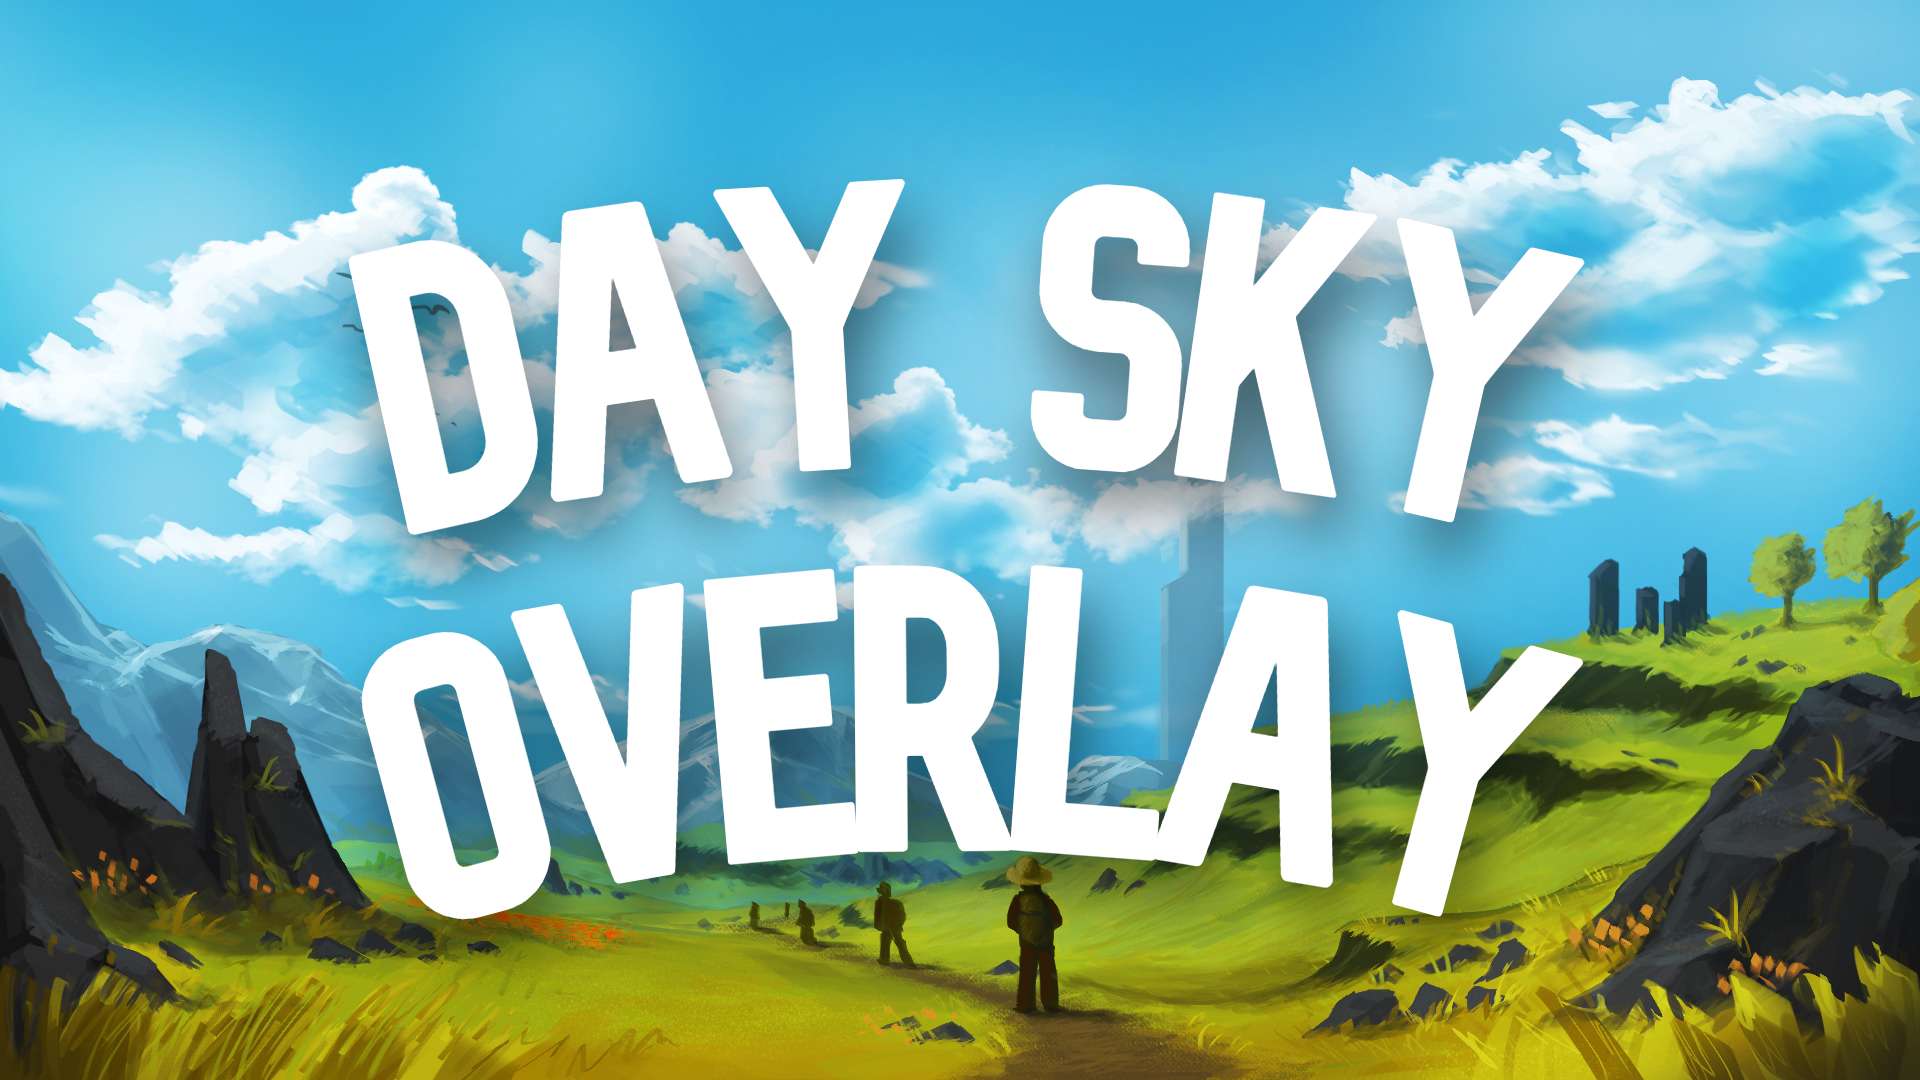 Day Sky Overlay #15 16 by rh56 on PvPRP